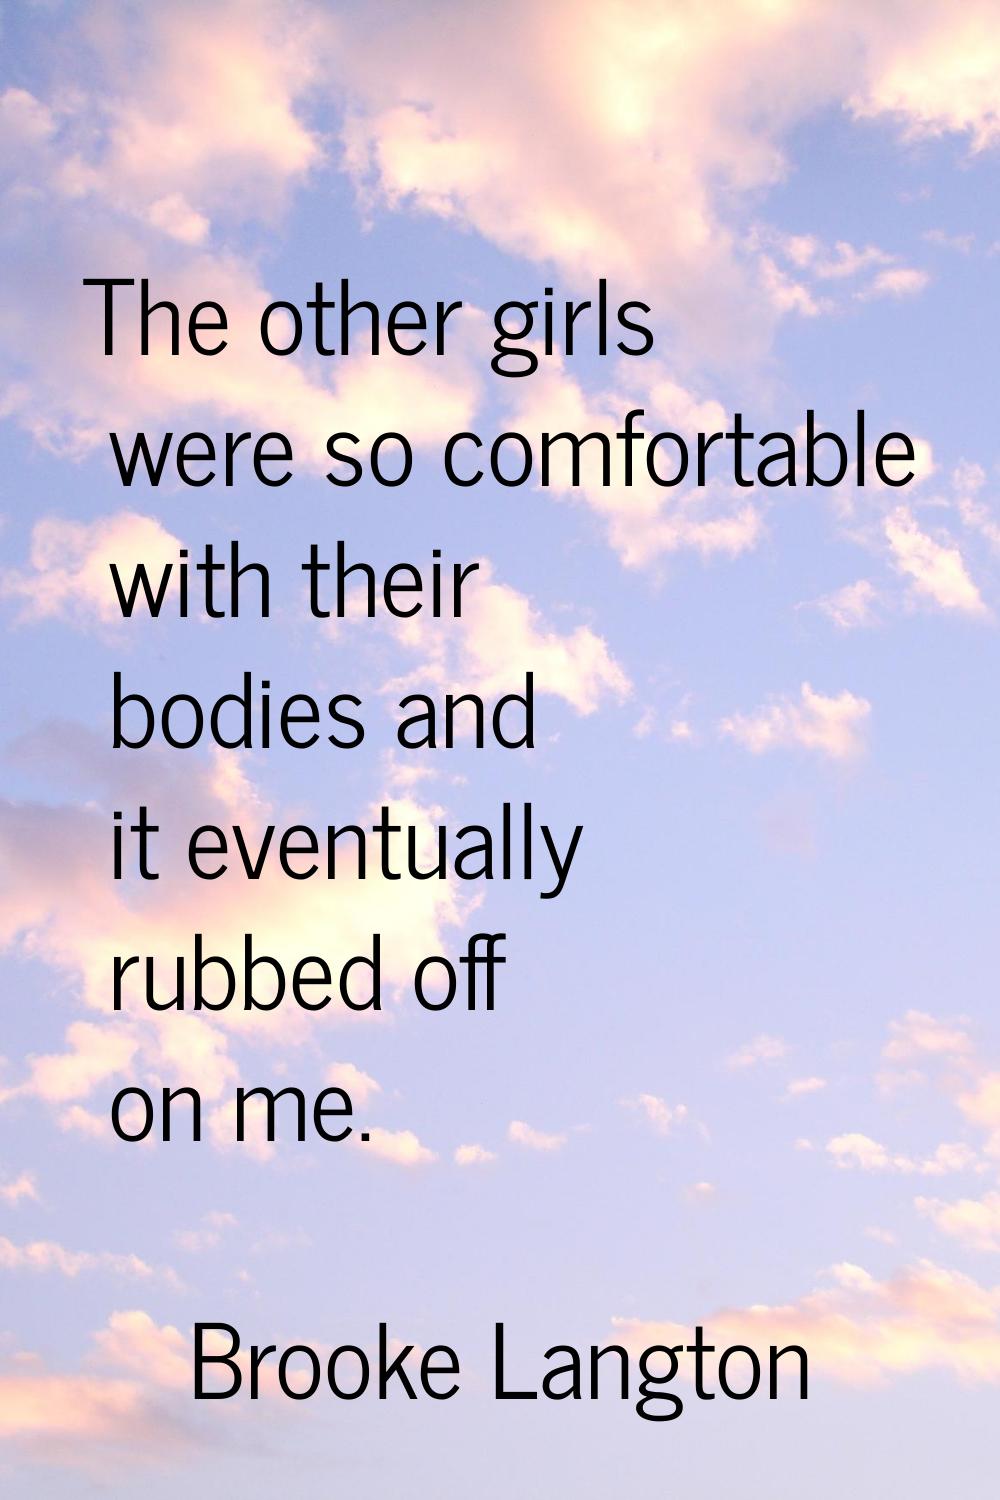 The other girls were so comfortable with their bodies and it eventually rubbed off on me.